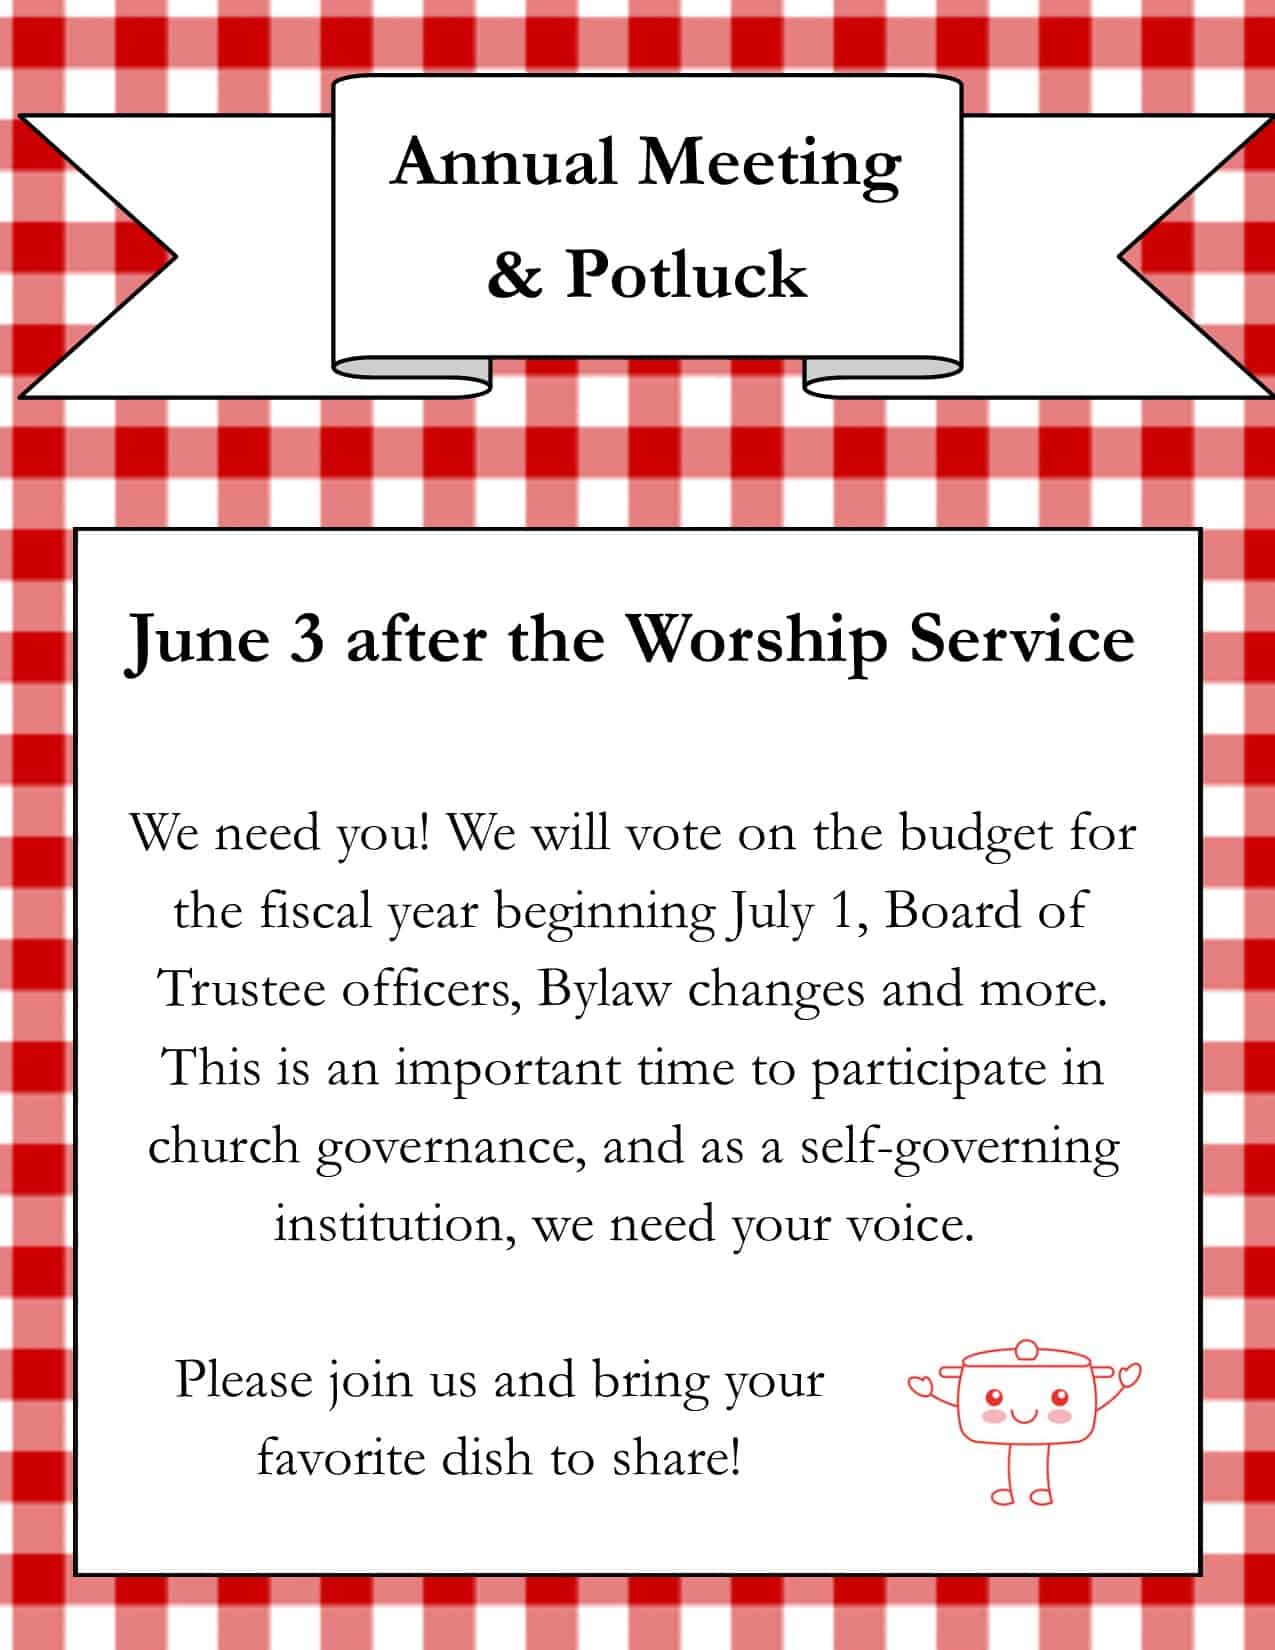 Annual Meeting and Potluck Flyer 